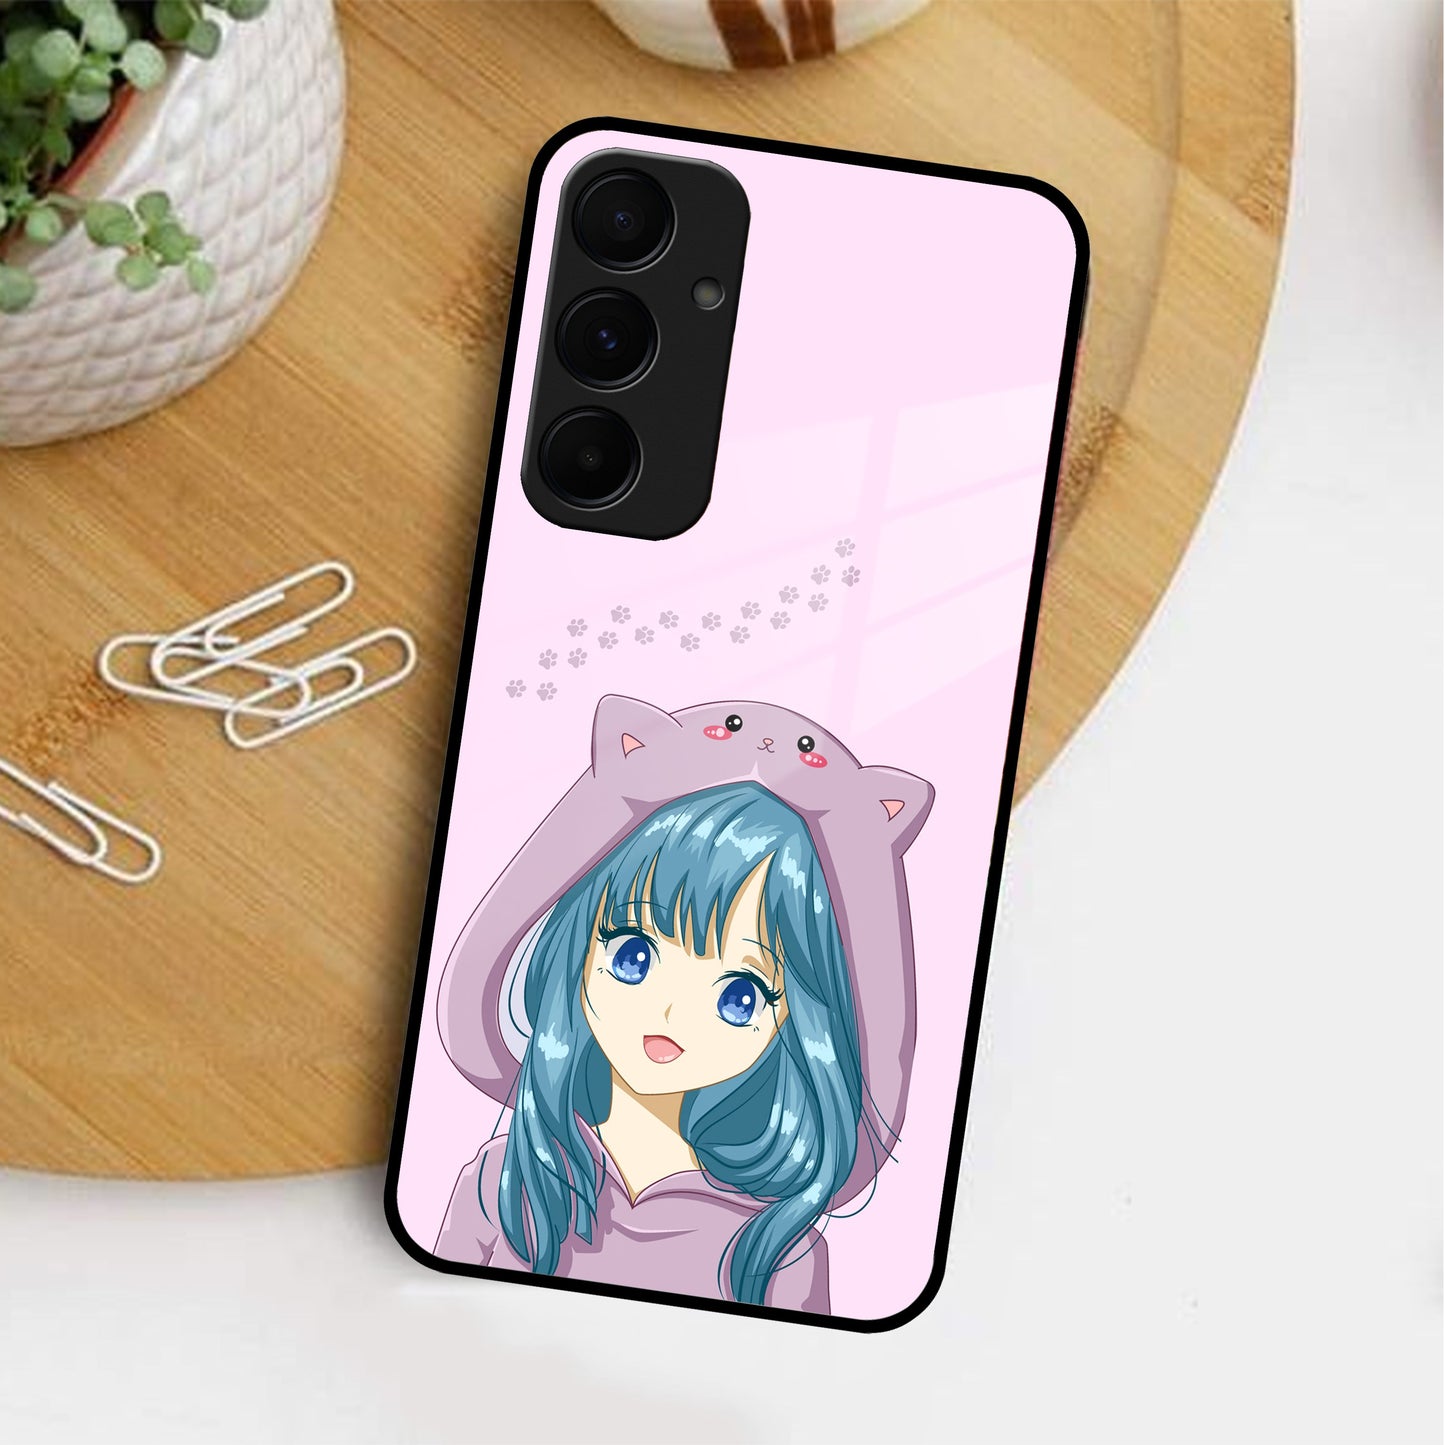 Purple Aesthetic Girl With Cat Phone Glass Case Cover For Samsung